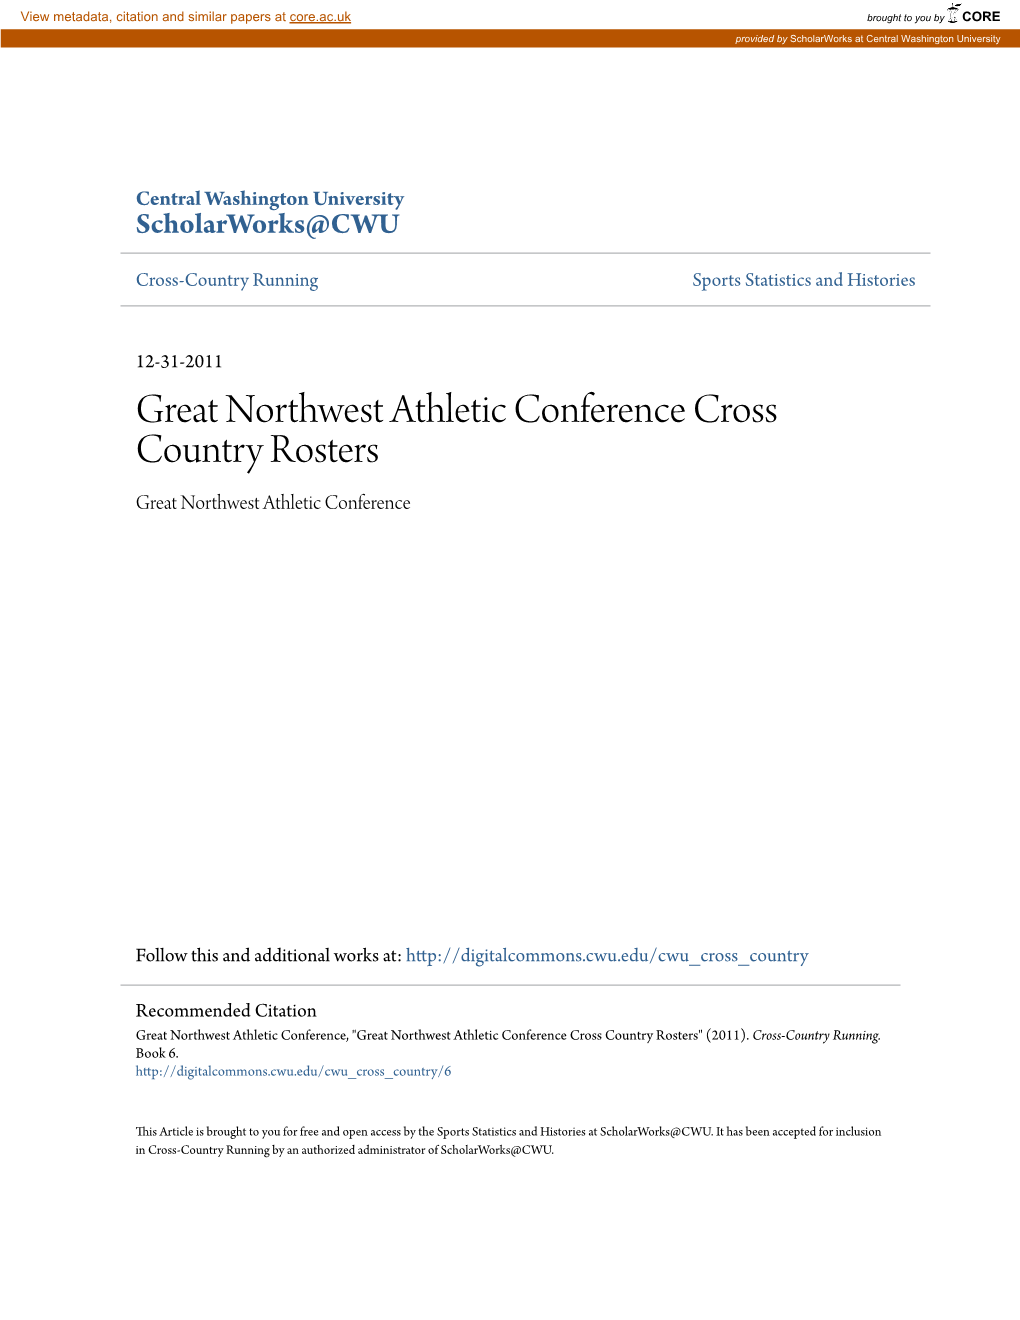 Great Northwest Athletic Conference Cross Country Rosters Great Northwest Athletic Conference